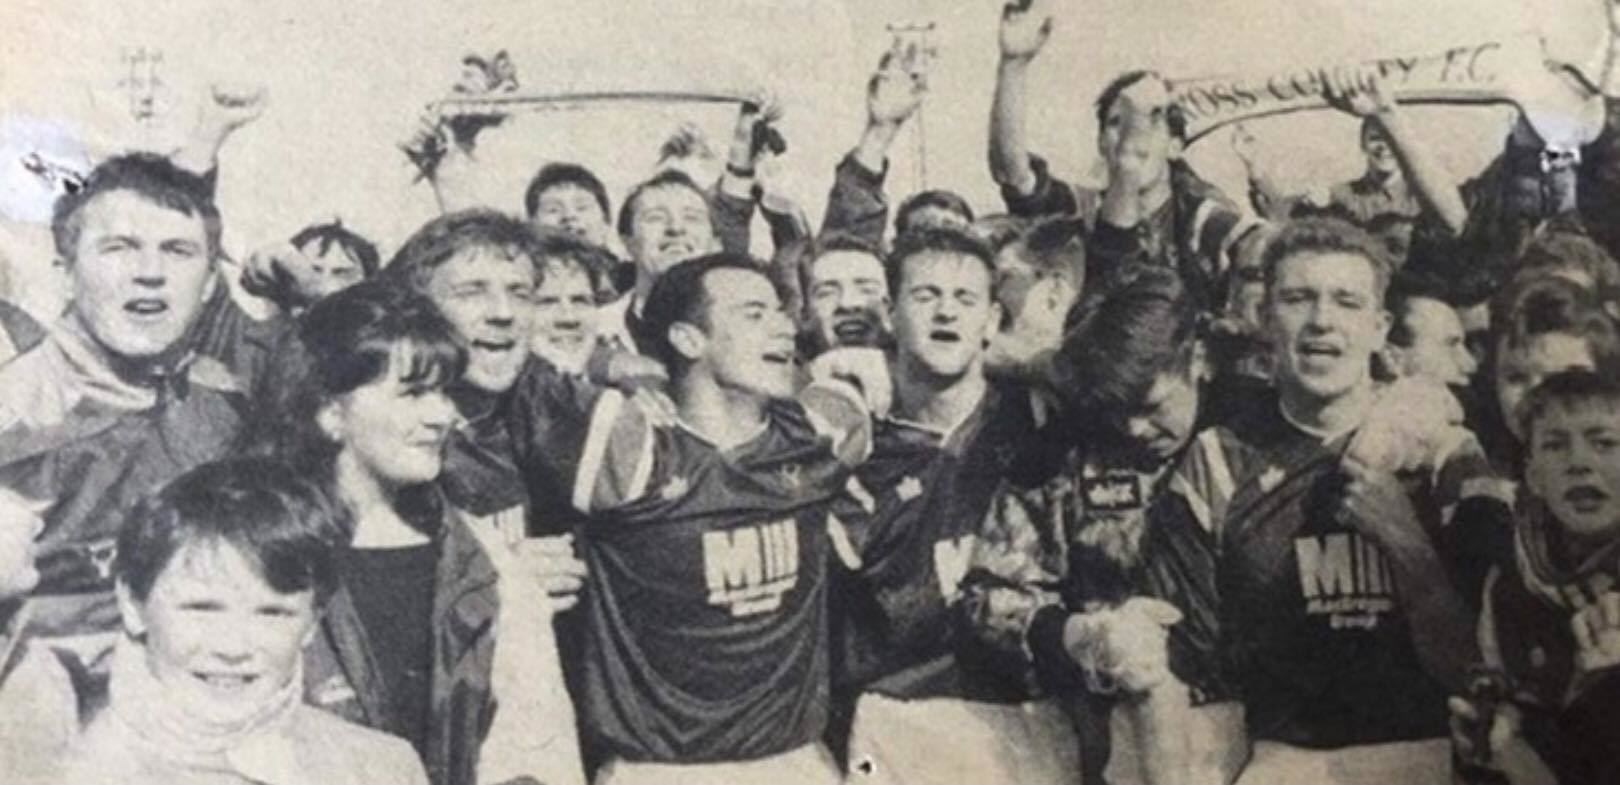 Ross County's players celebrate winning the 1991/92 Highland League title.